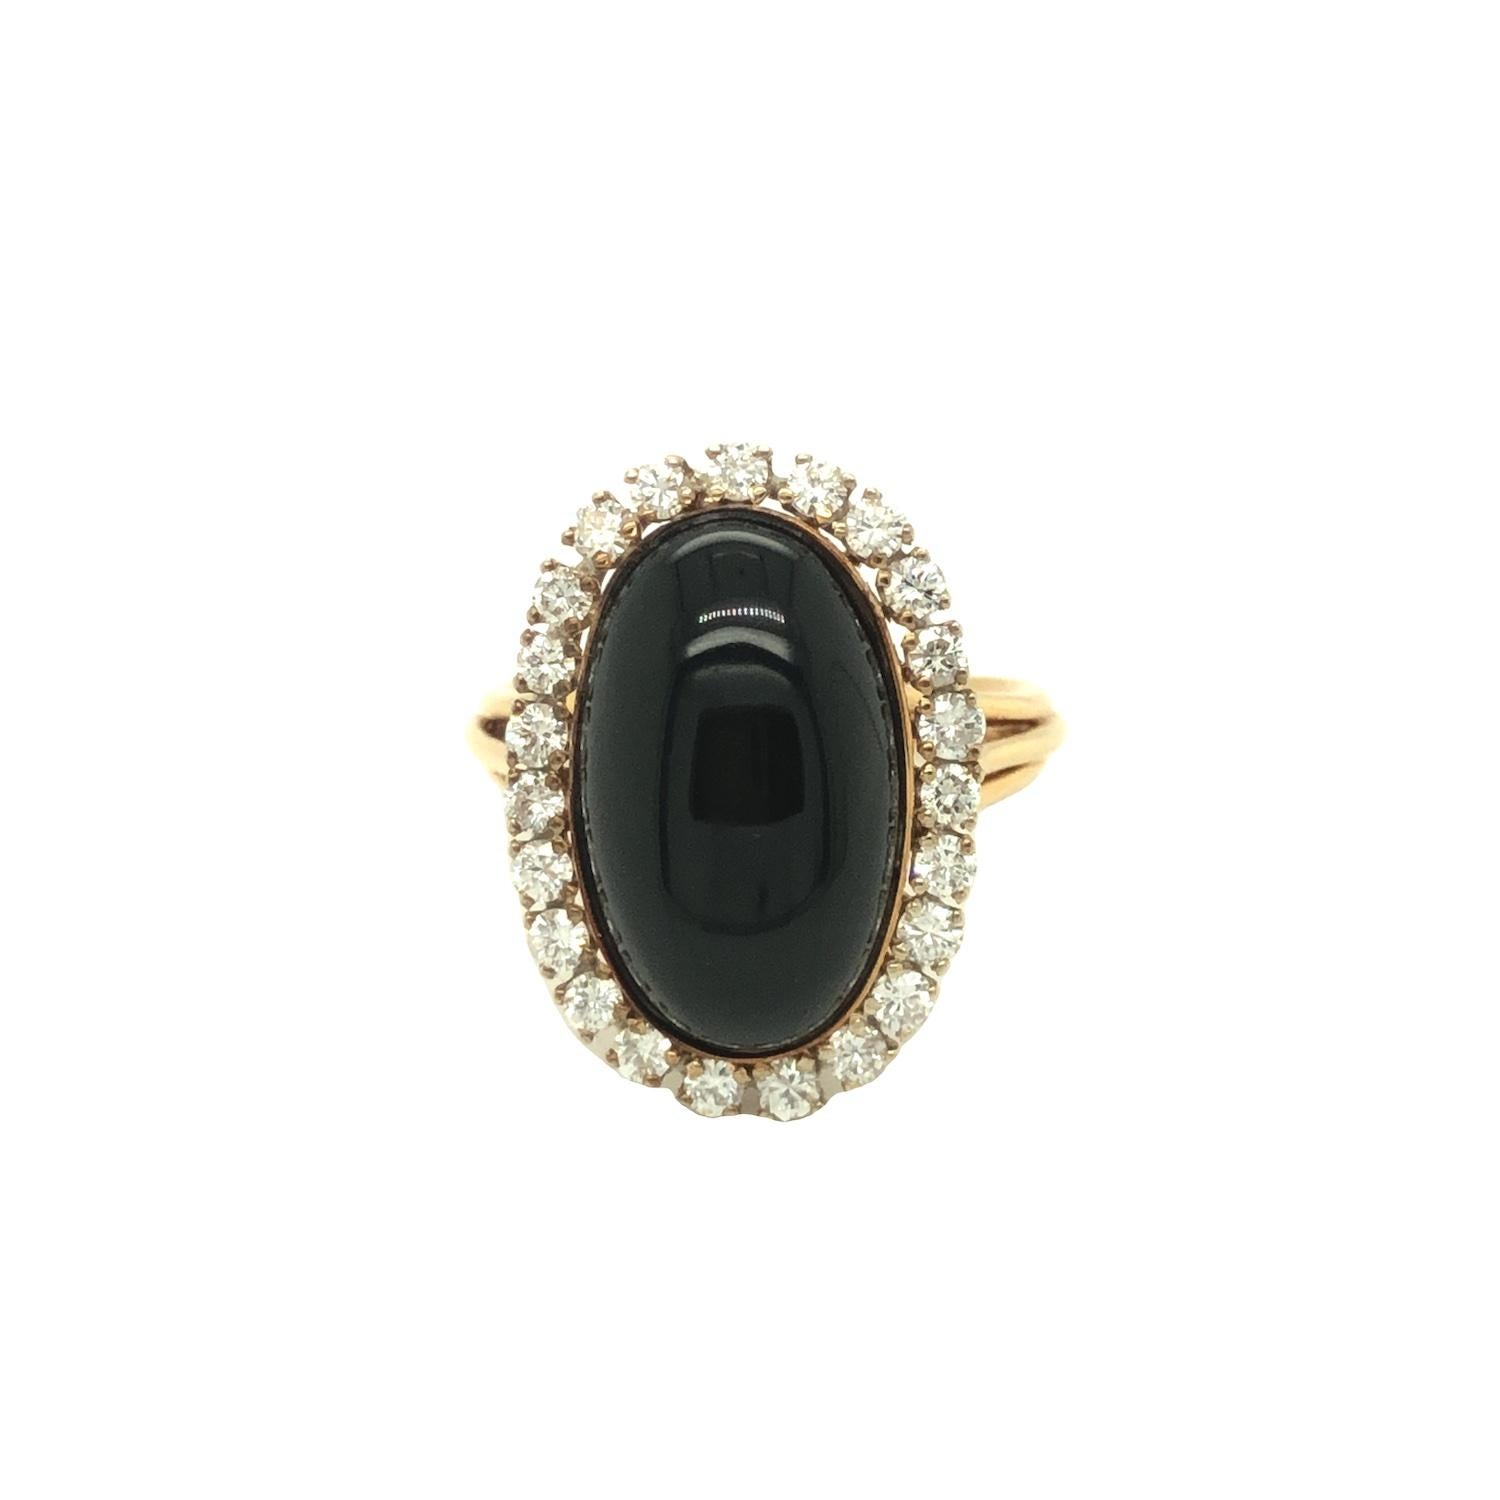 Onyx is thought to be a protector for harmonious relationships. This elegant onyx and diamond ring is a beautiful alternative for an engagement ring. The oval shaped cabochon onyx is encircled by near colorless round brilliant cut diamonds weighing